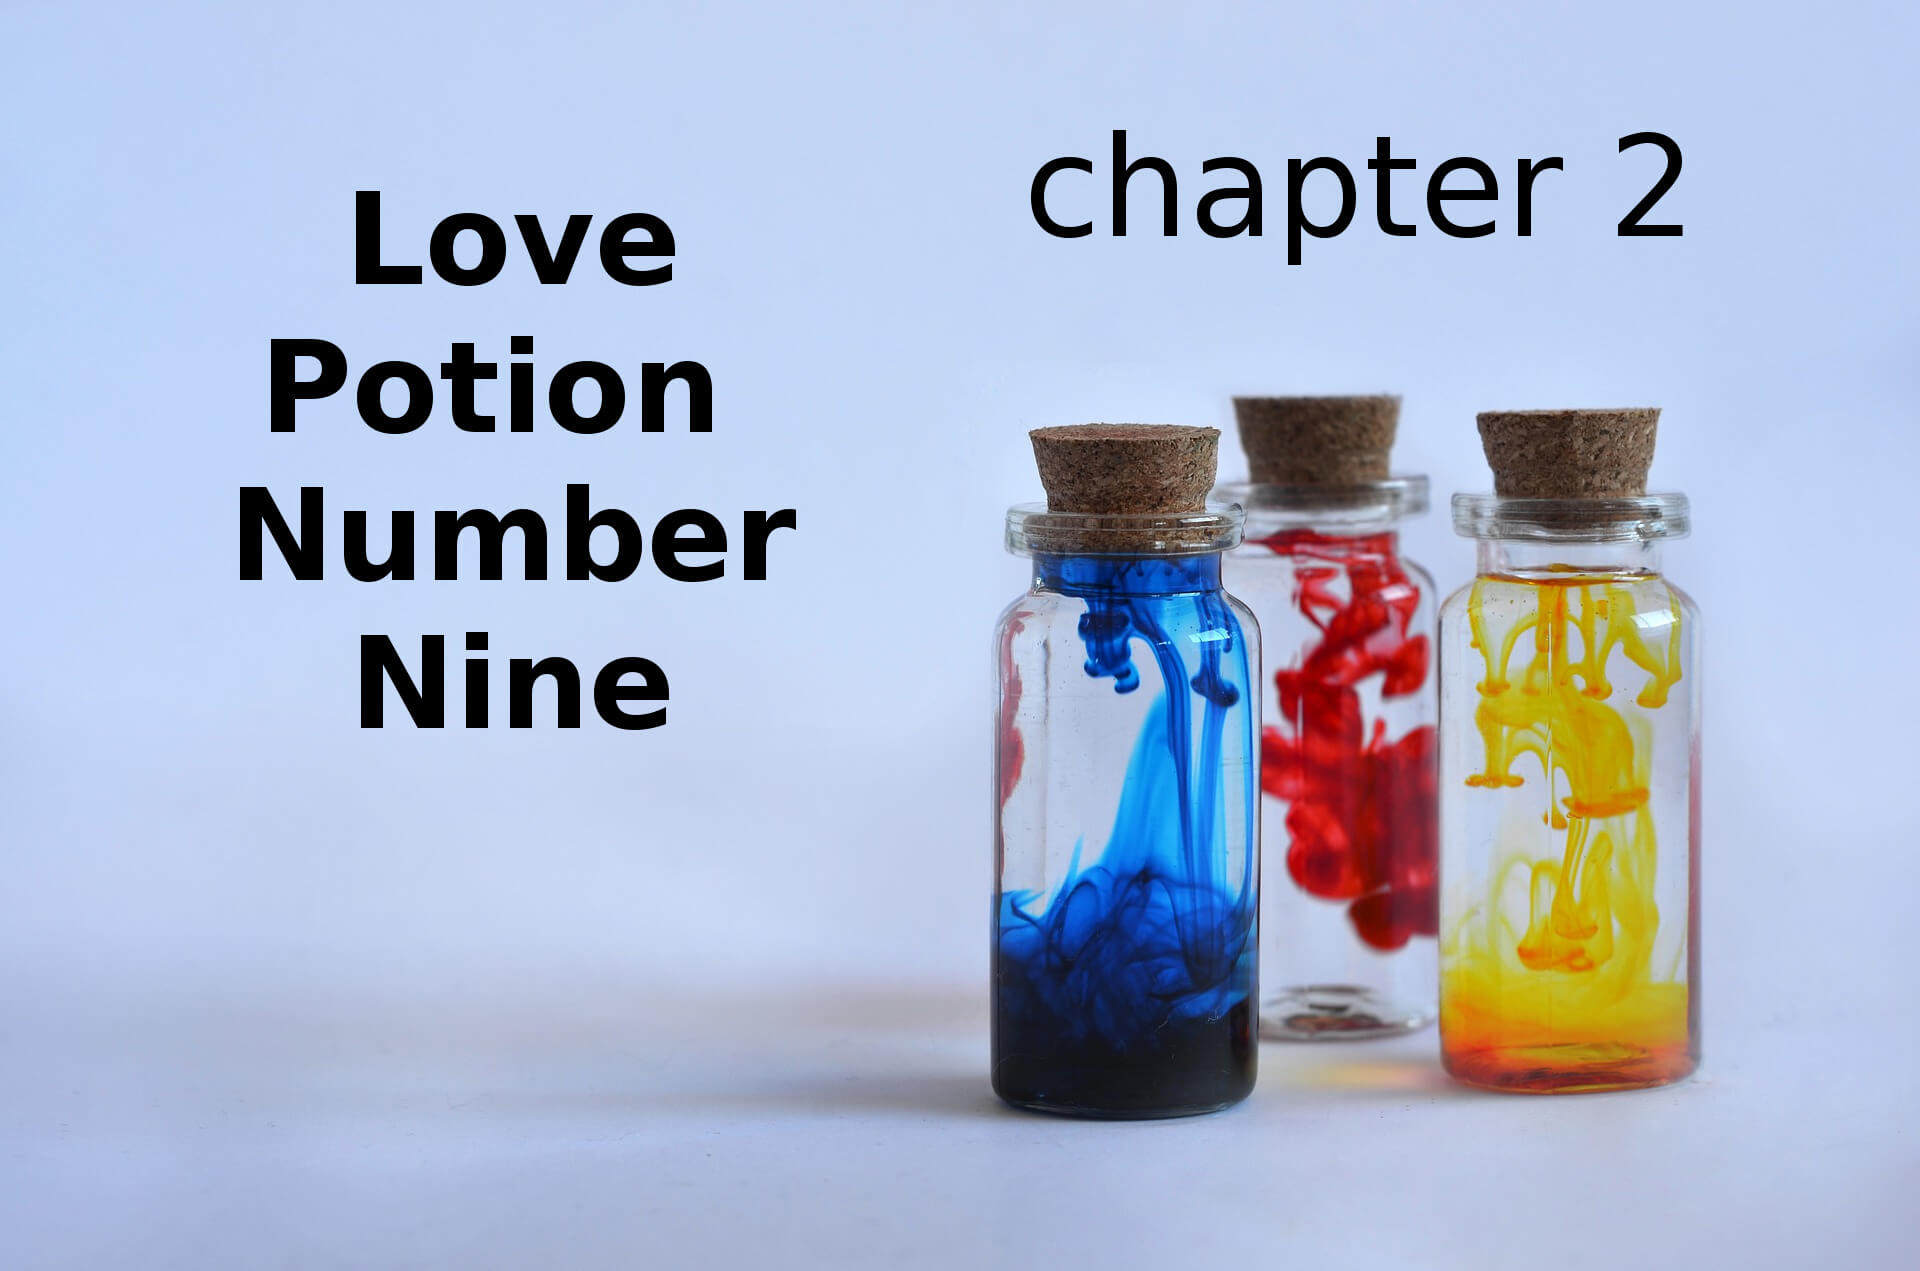 Love Potion Number Nine chapter 2 Zorro fanfiction